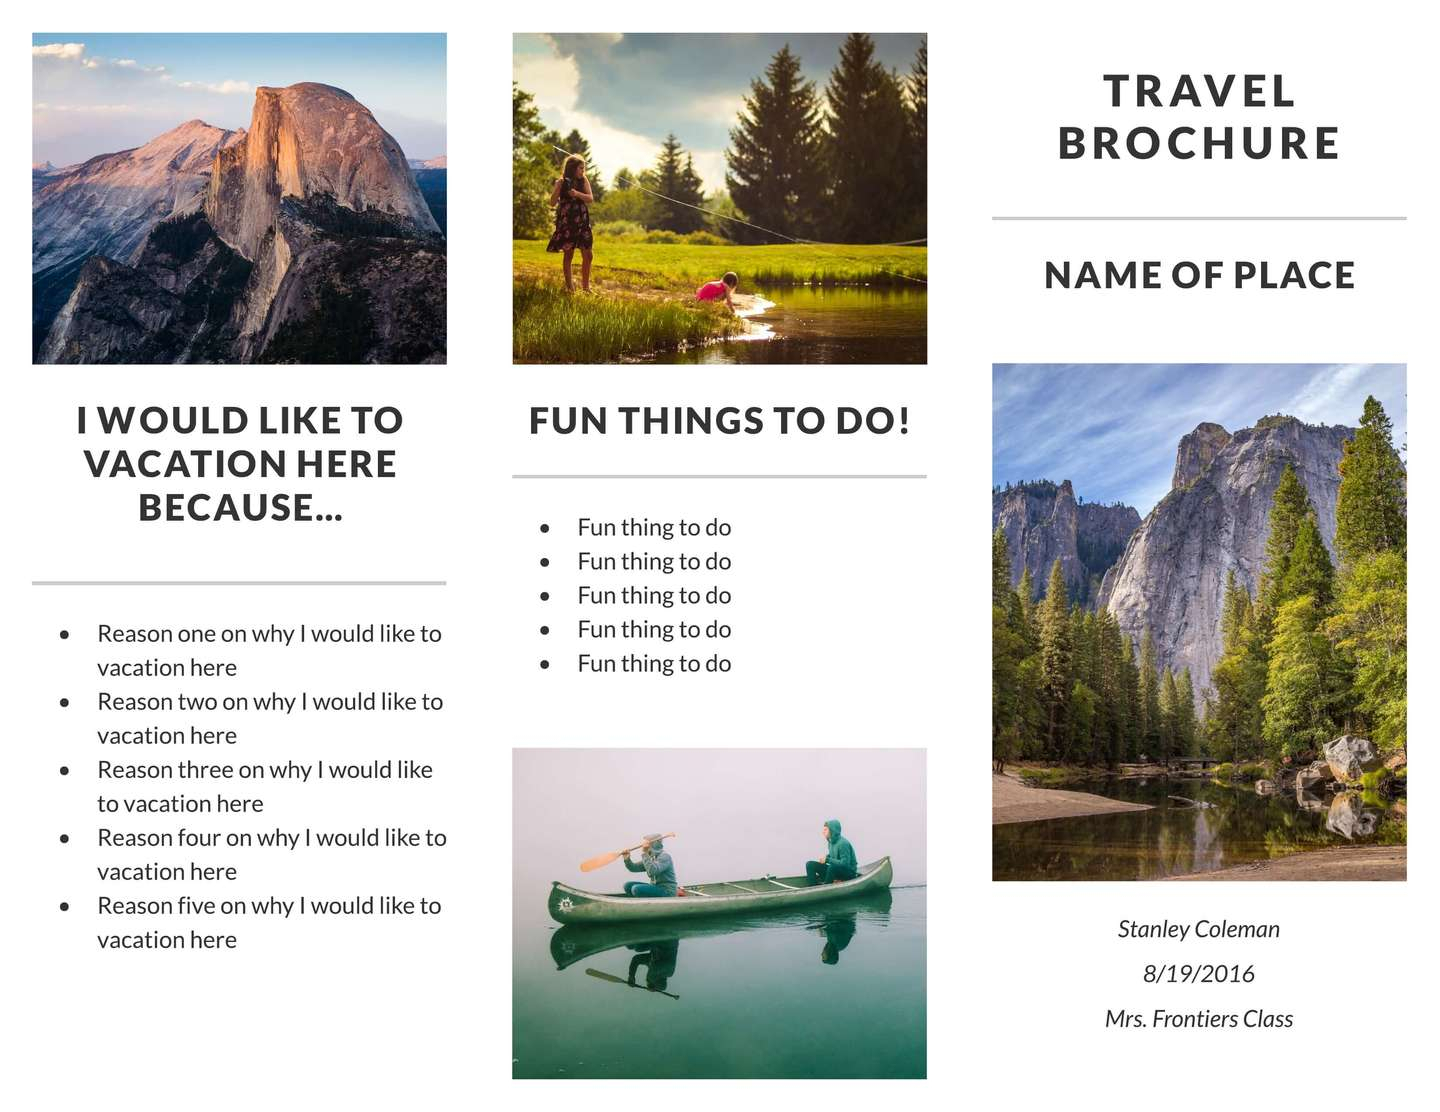 Free Travel Brochure Templates & Examples [8 Free Templates] Regarding Travel And Tourism Brochure Templates Free